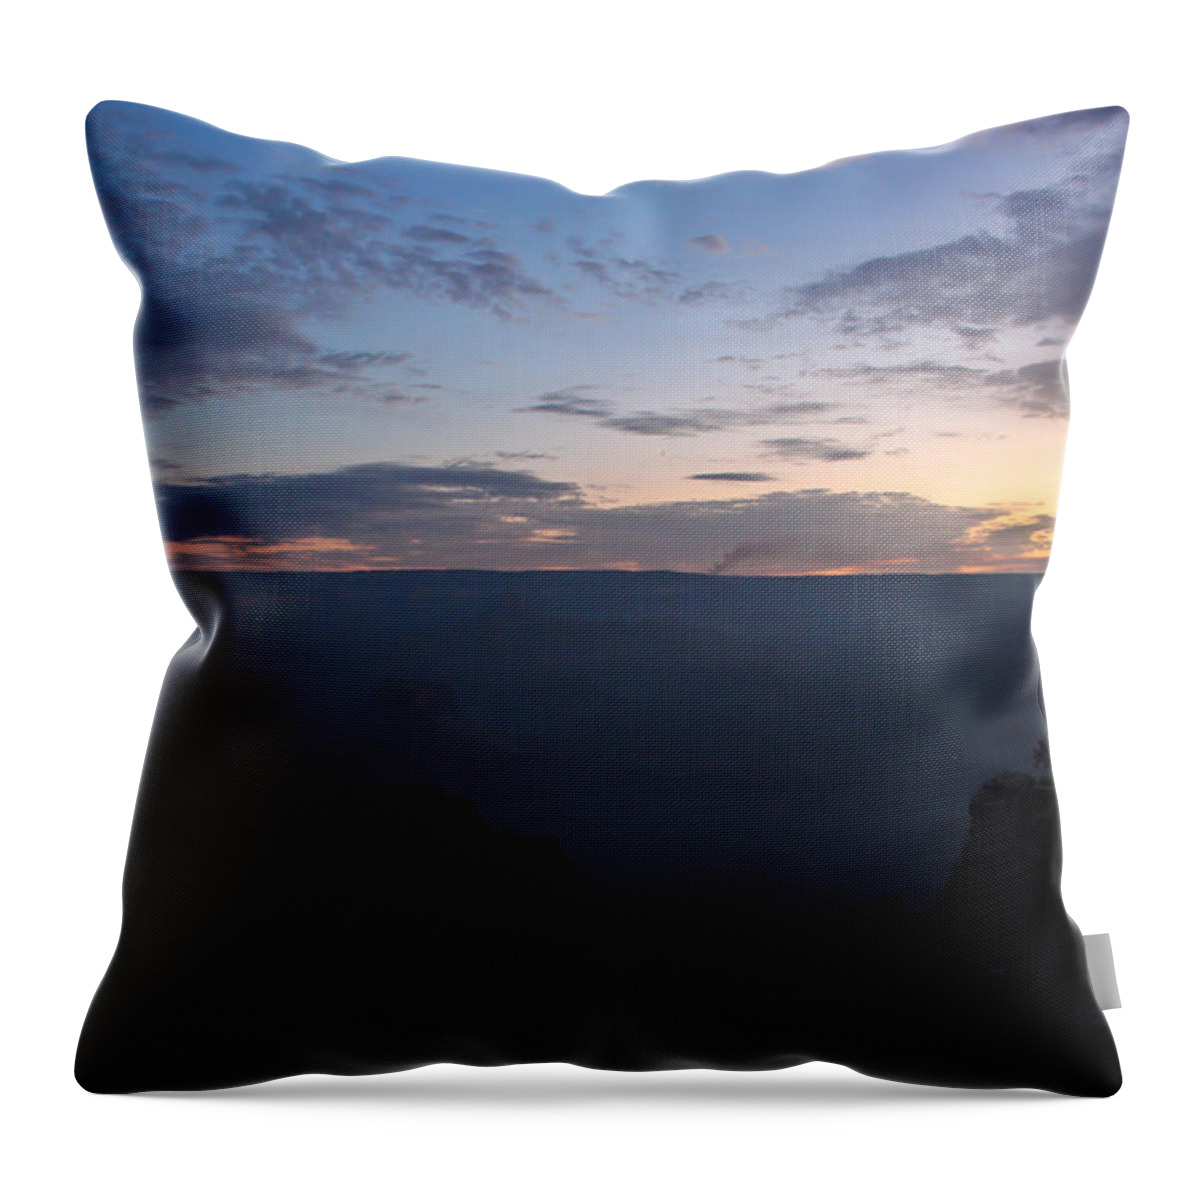 Grand Canyon Throw Pillow featuring the photograph 24 Minutes To Sunrise by Heidi Smith